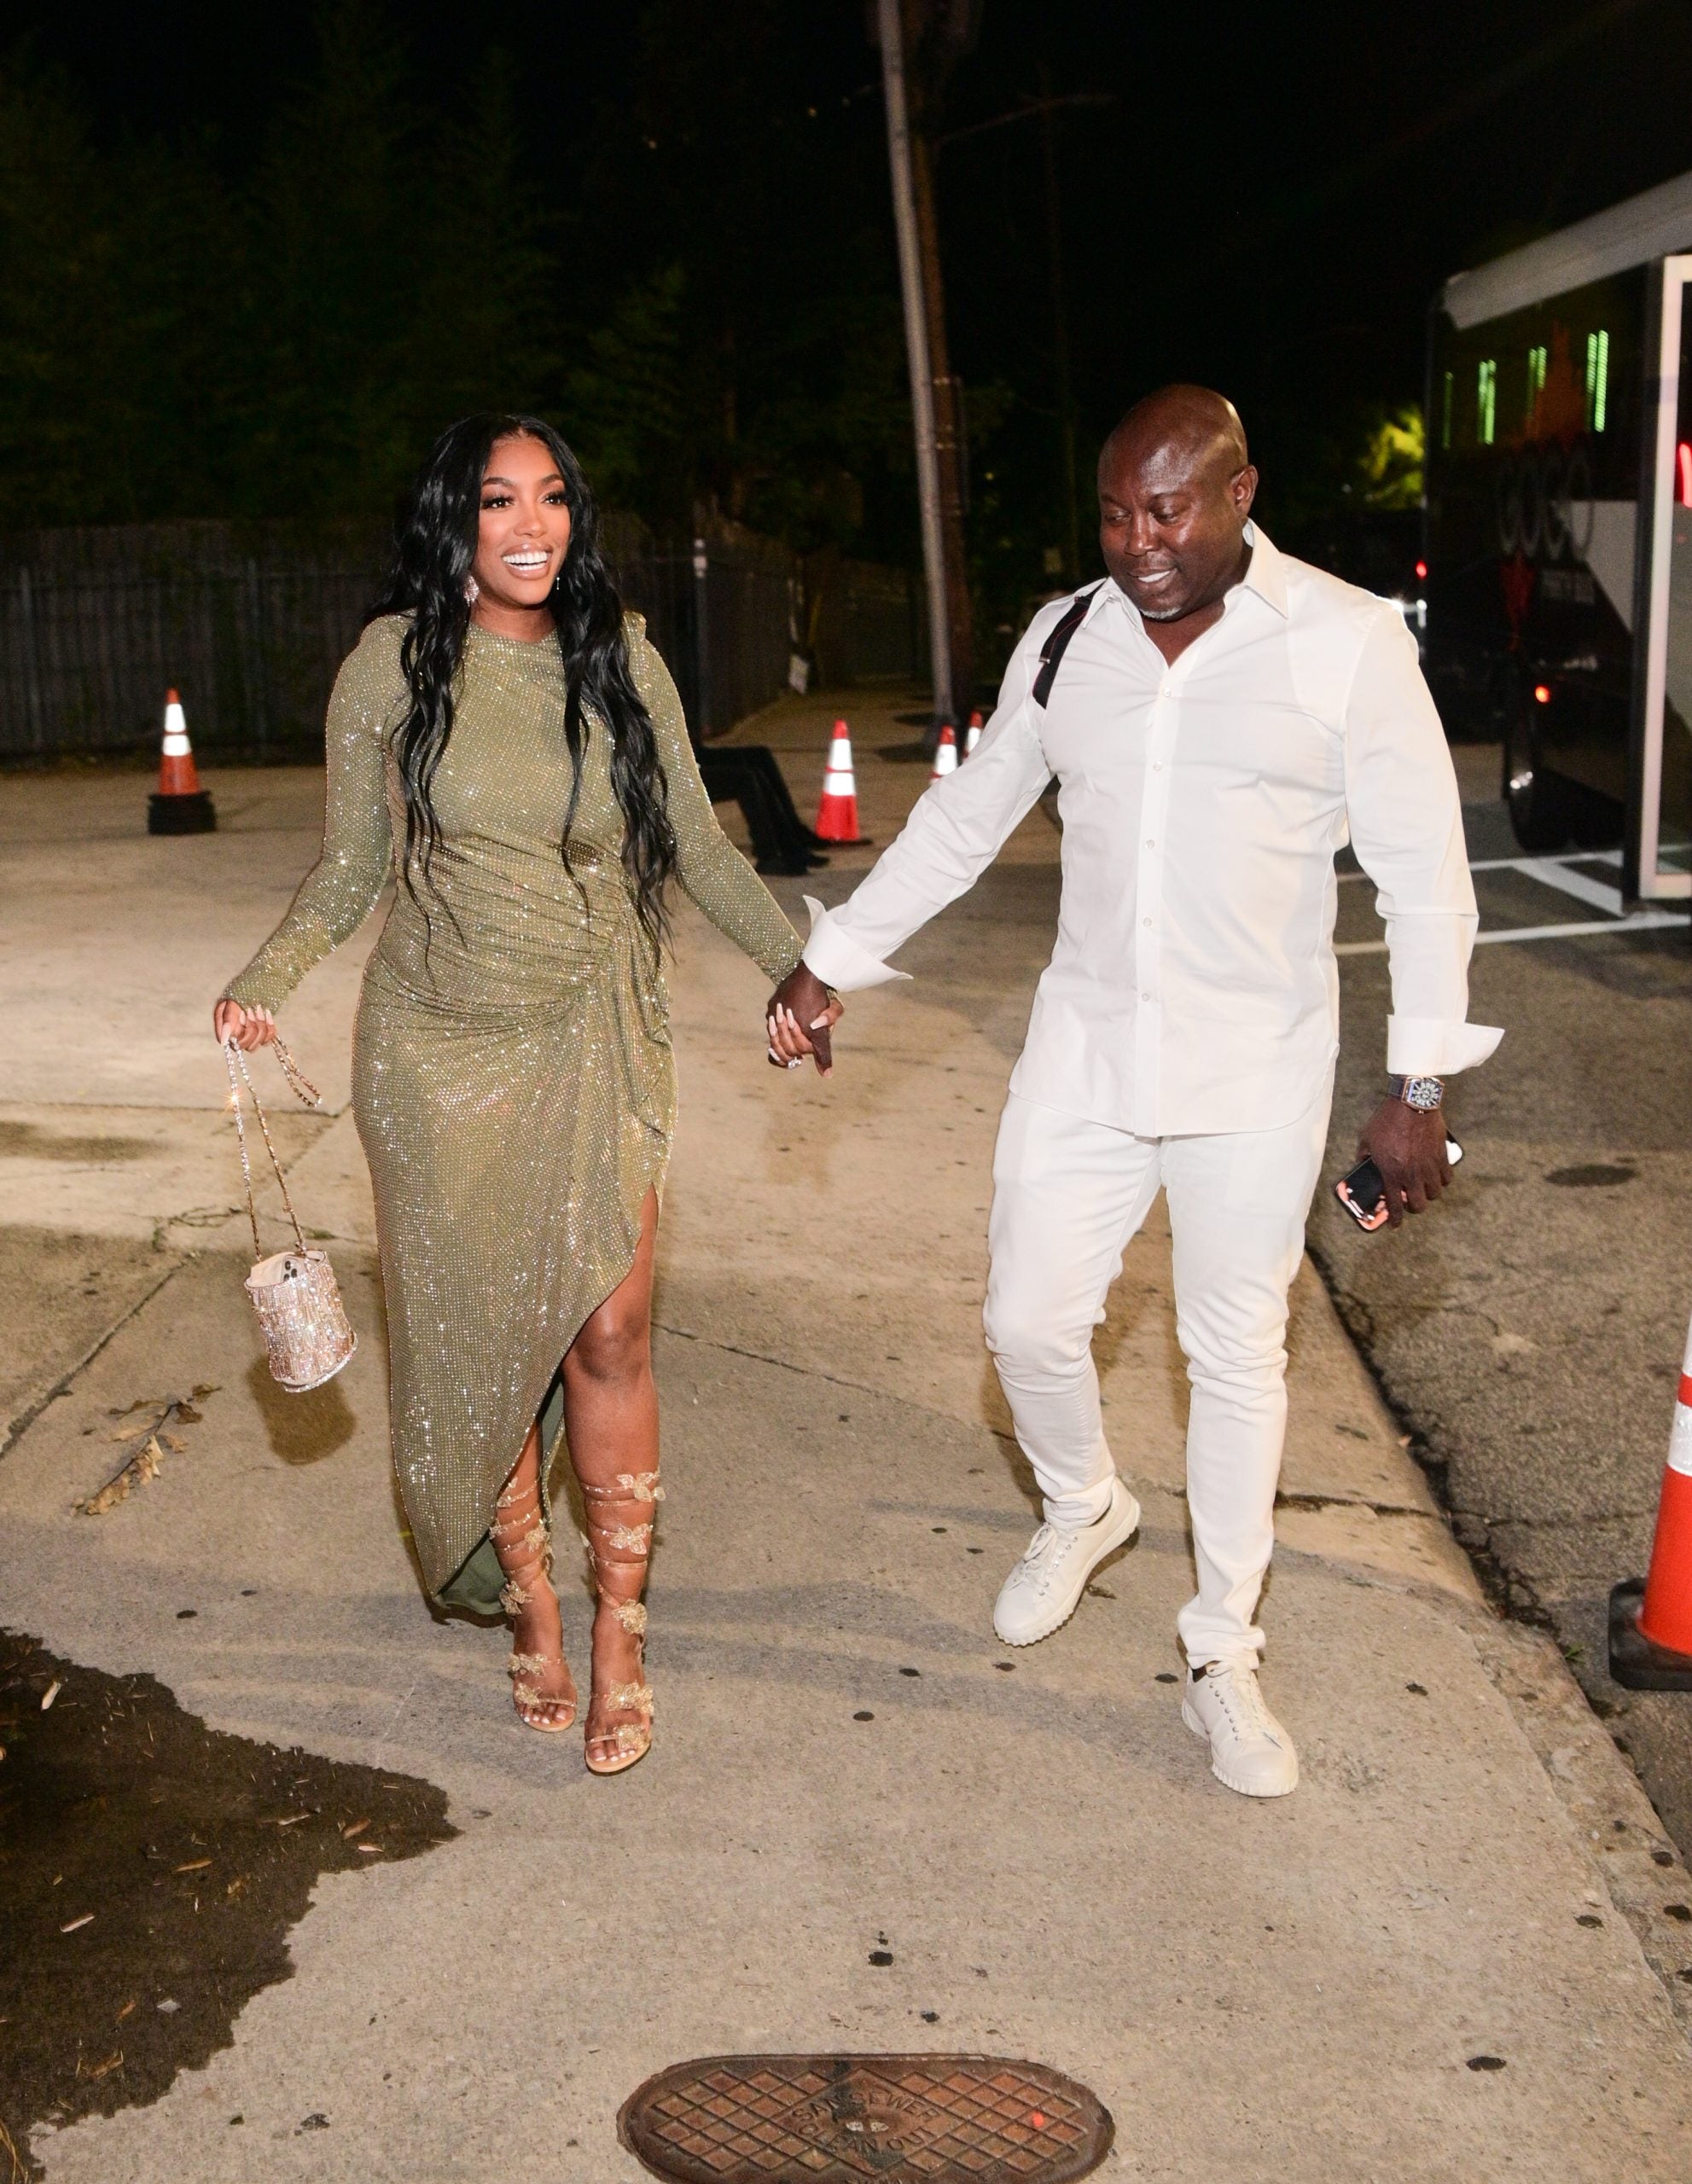 Porsha Williams And Simon Guobadia Divorcing After A Year Of Marriage: Their Relationship Timeline